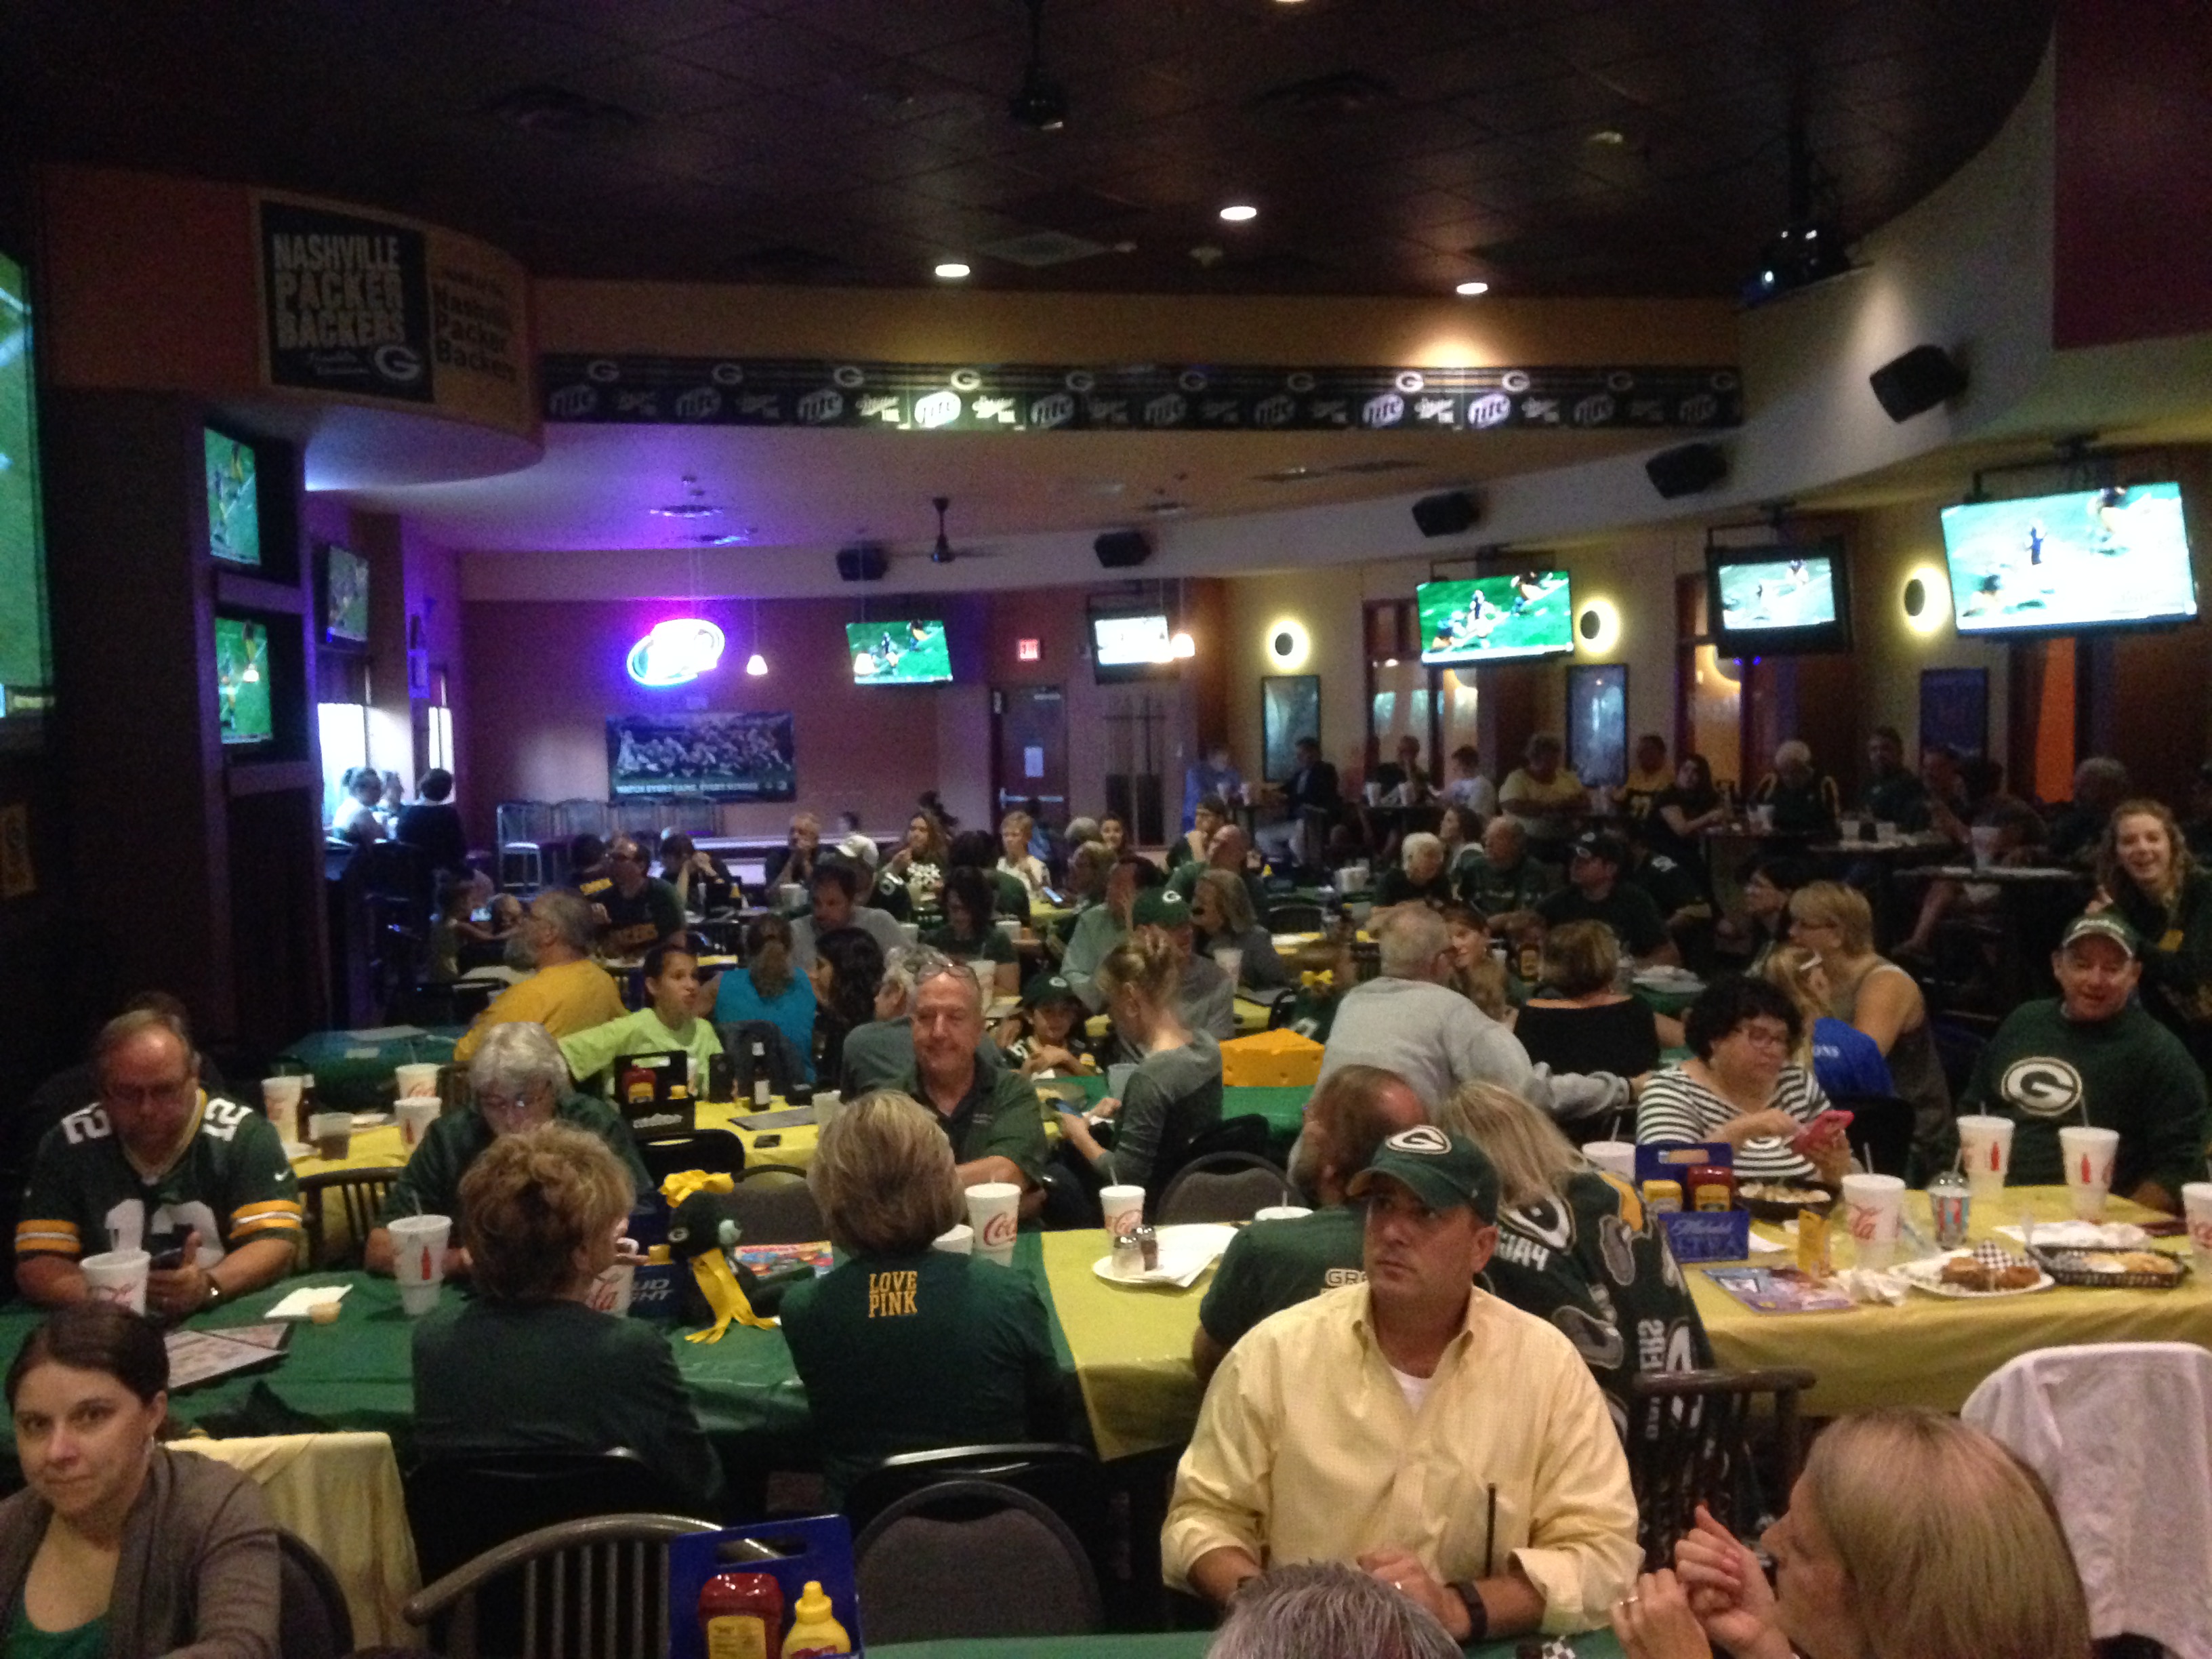 50 Packers bars in 50 states (and beyond)